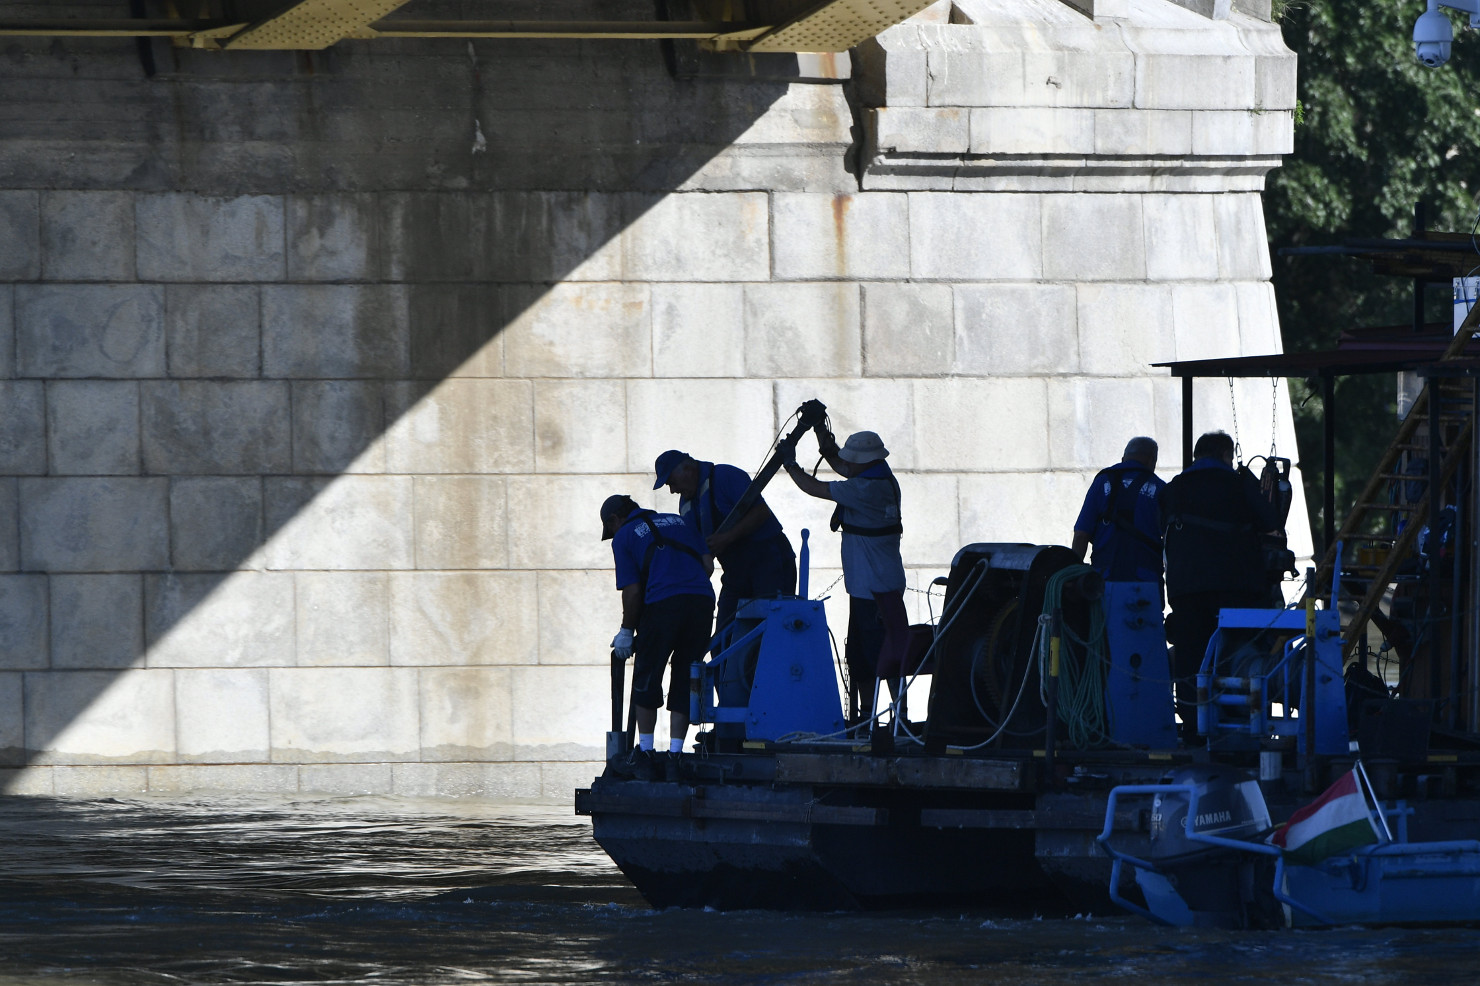 Hungarian Opinion: Deadly Boat Accident In Budapest